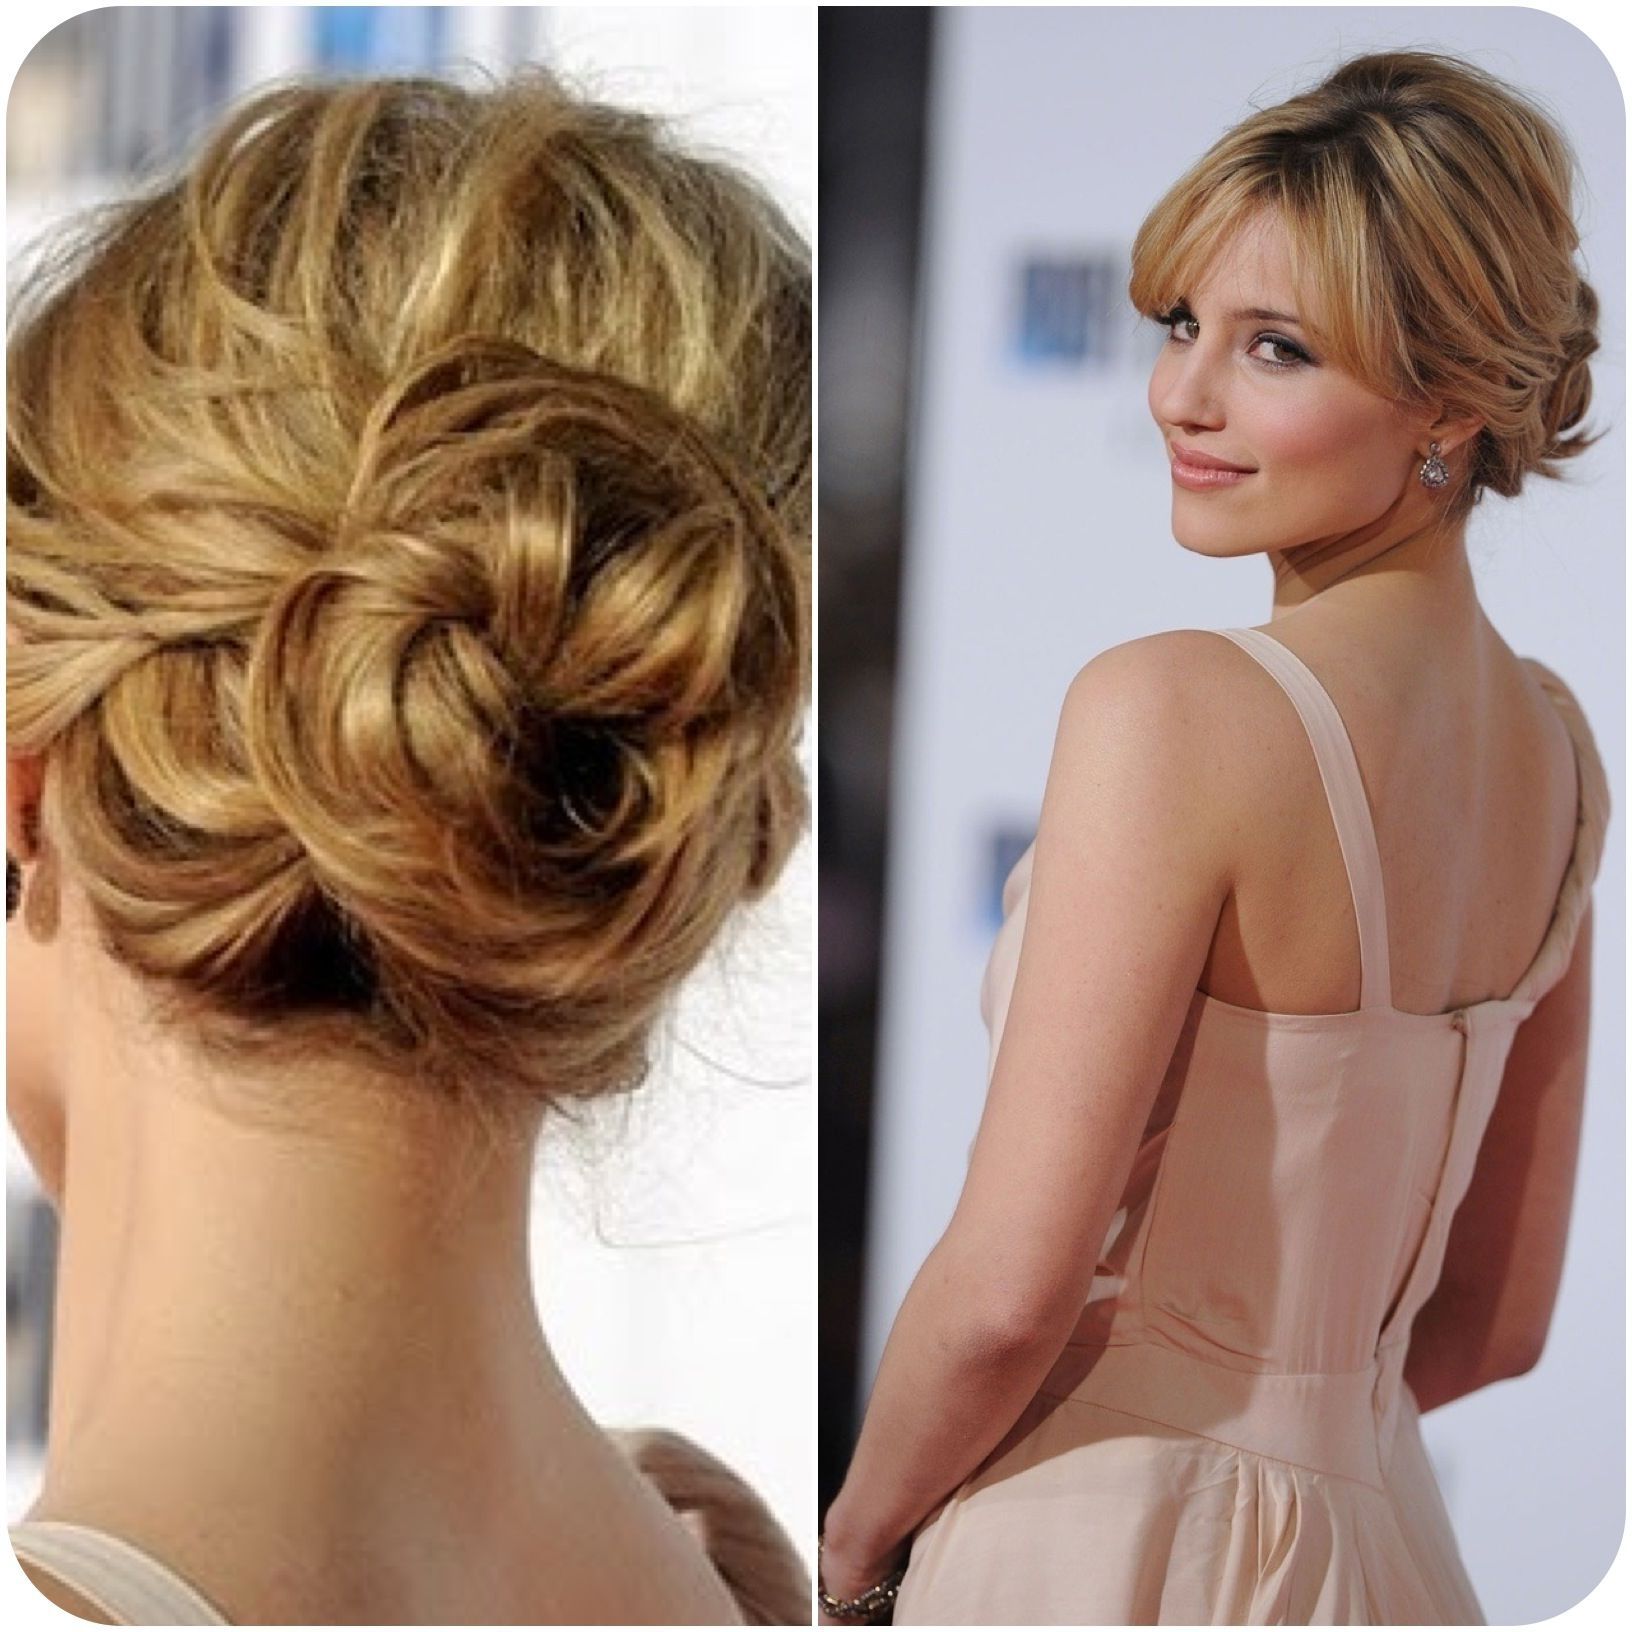 Dianna Agron Romantic Updo With Bangs | Hair | Pinterest | Dianna Regarding Hairstyles For Long Hair With Bangs Updos (View 15 of 15)